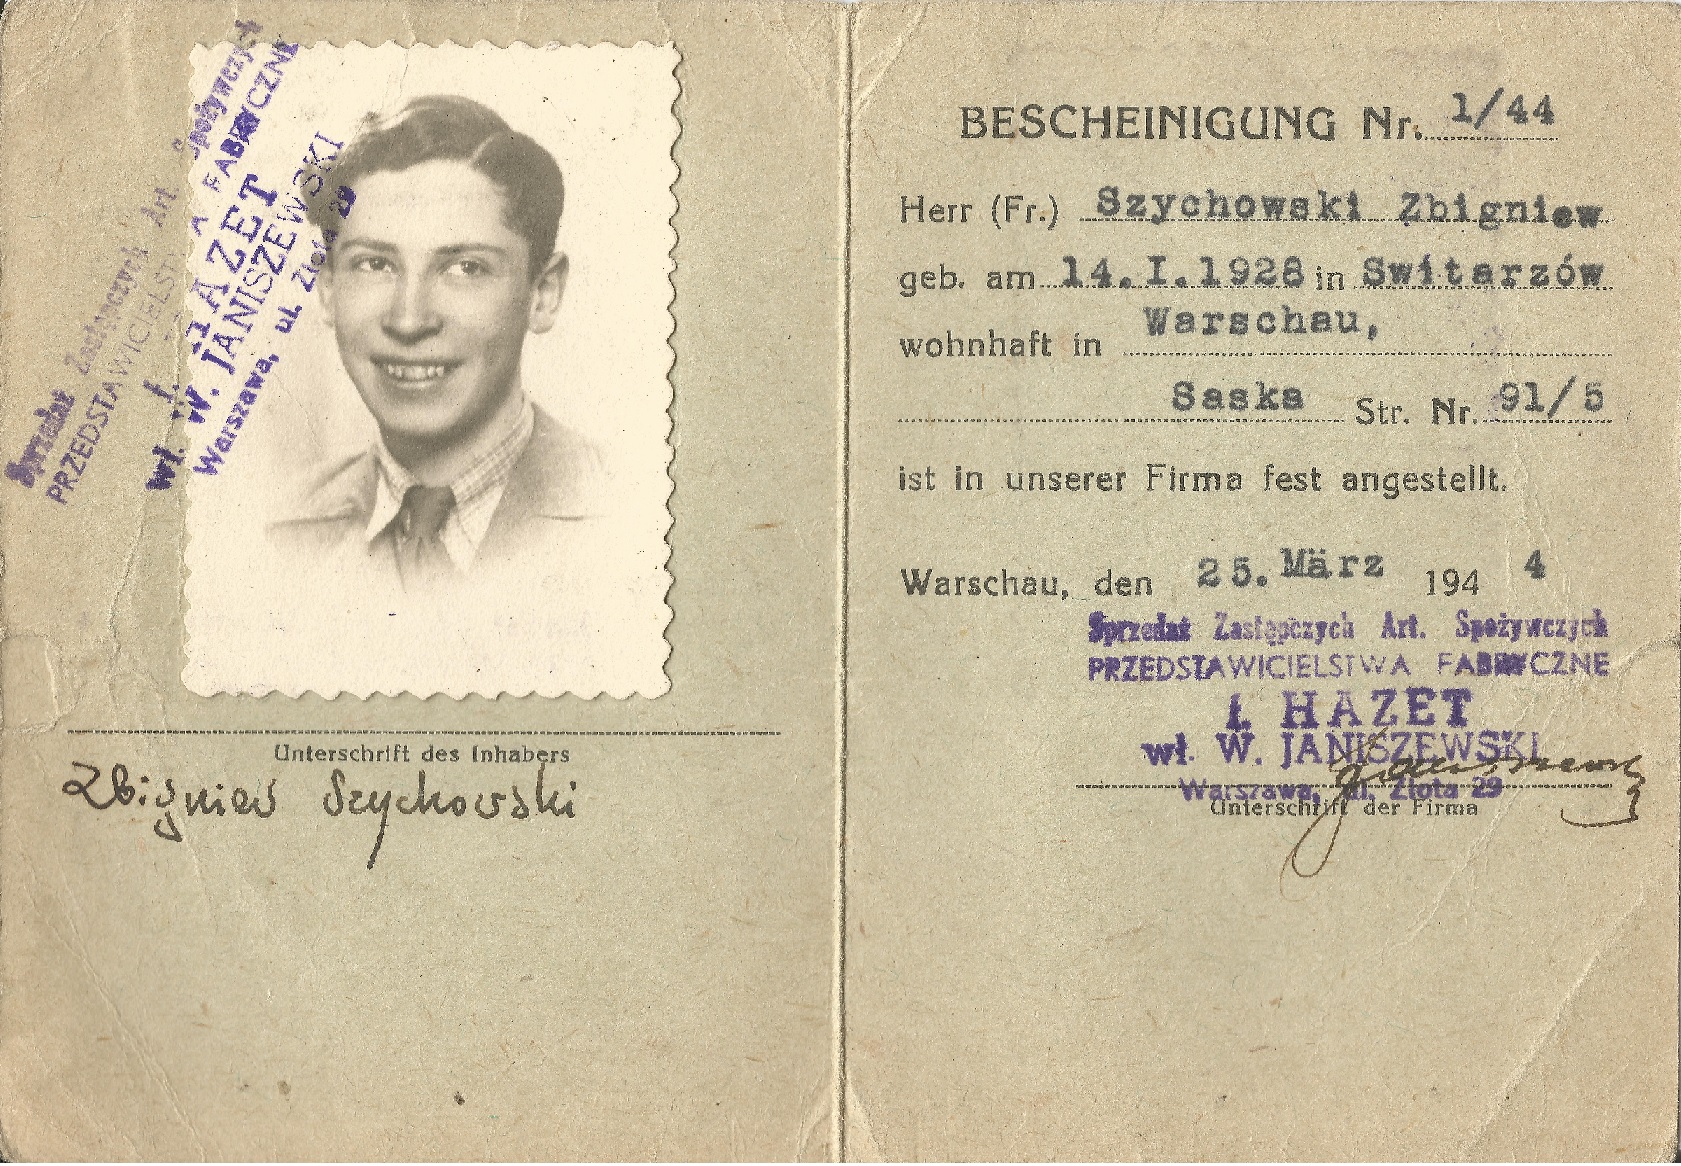 Aryan identity paper issued on March 25, 1944.